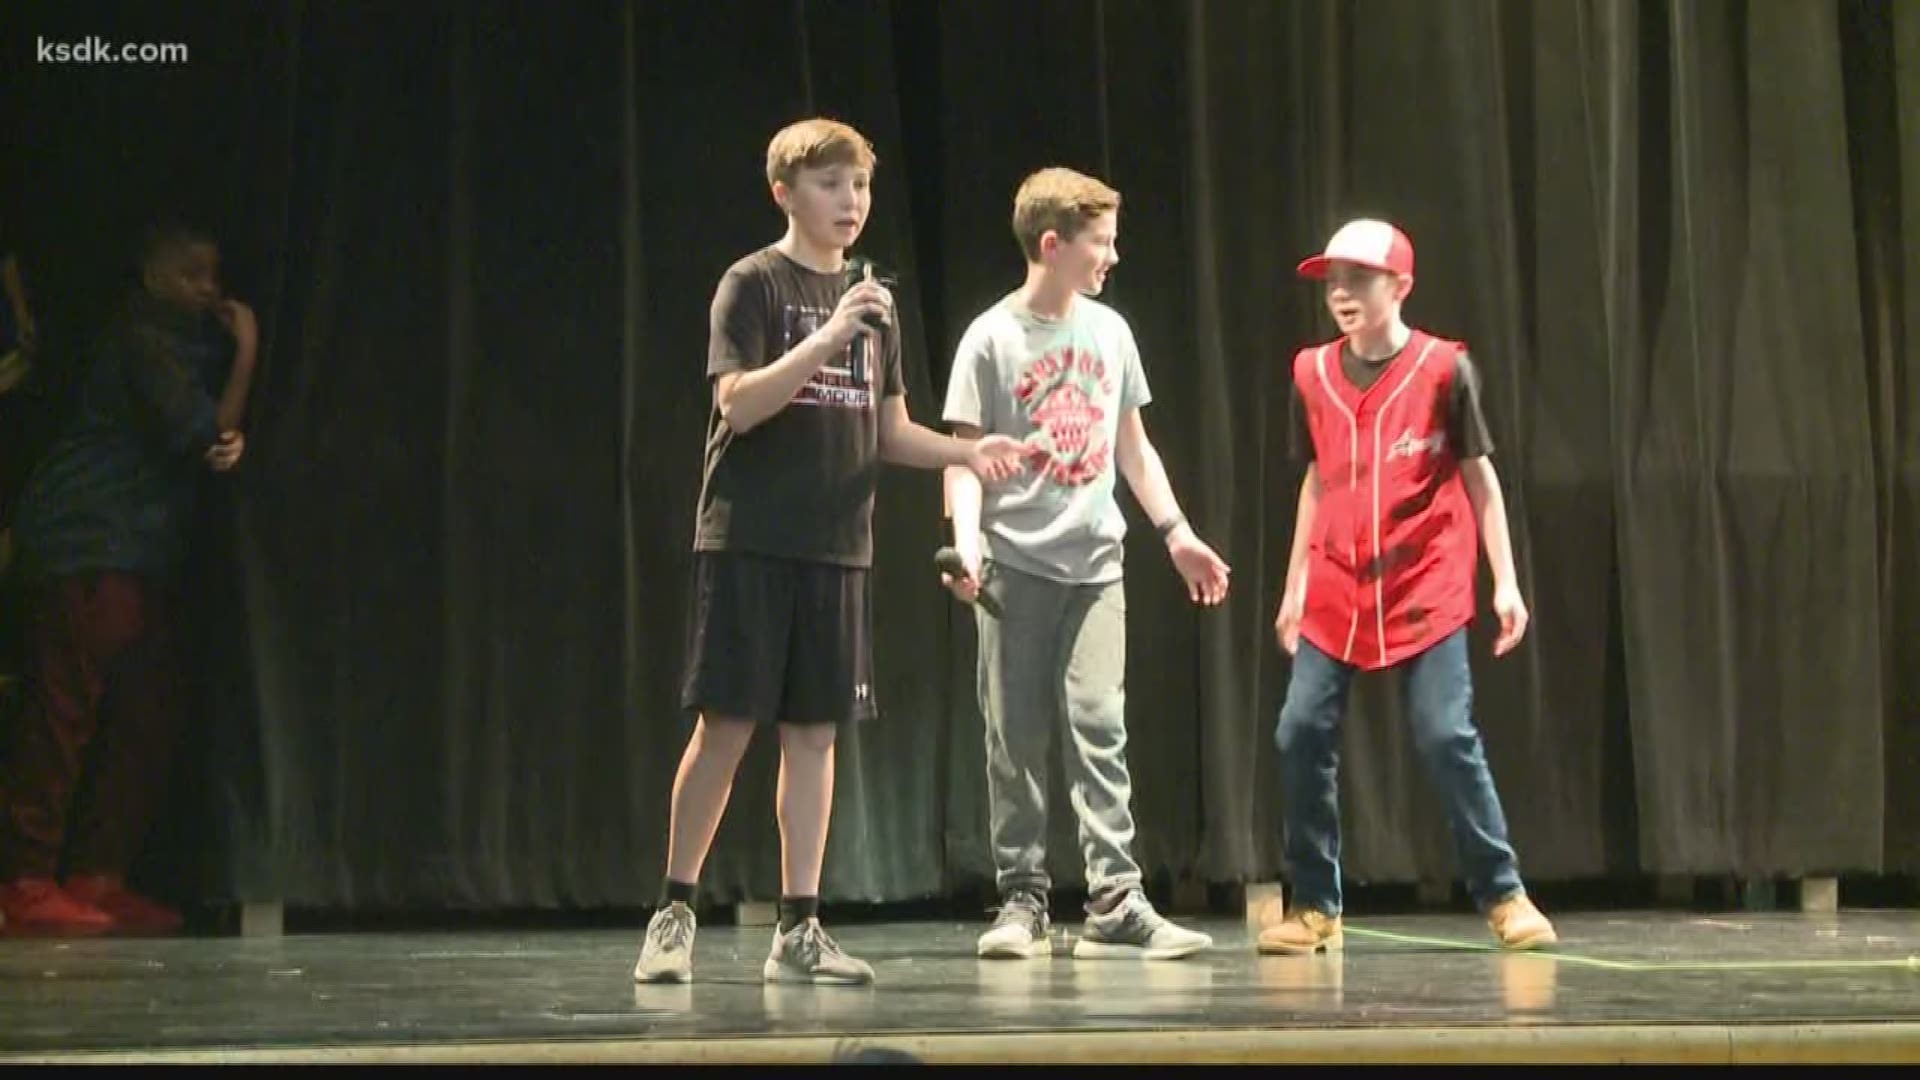 The steam master competition allows students to show off knowledge through rap or poetry.